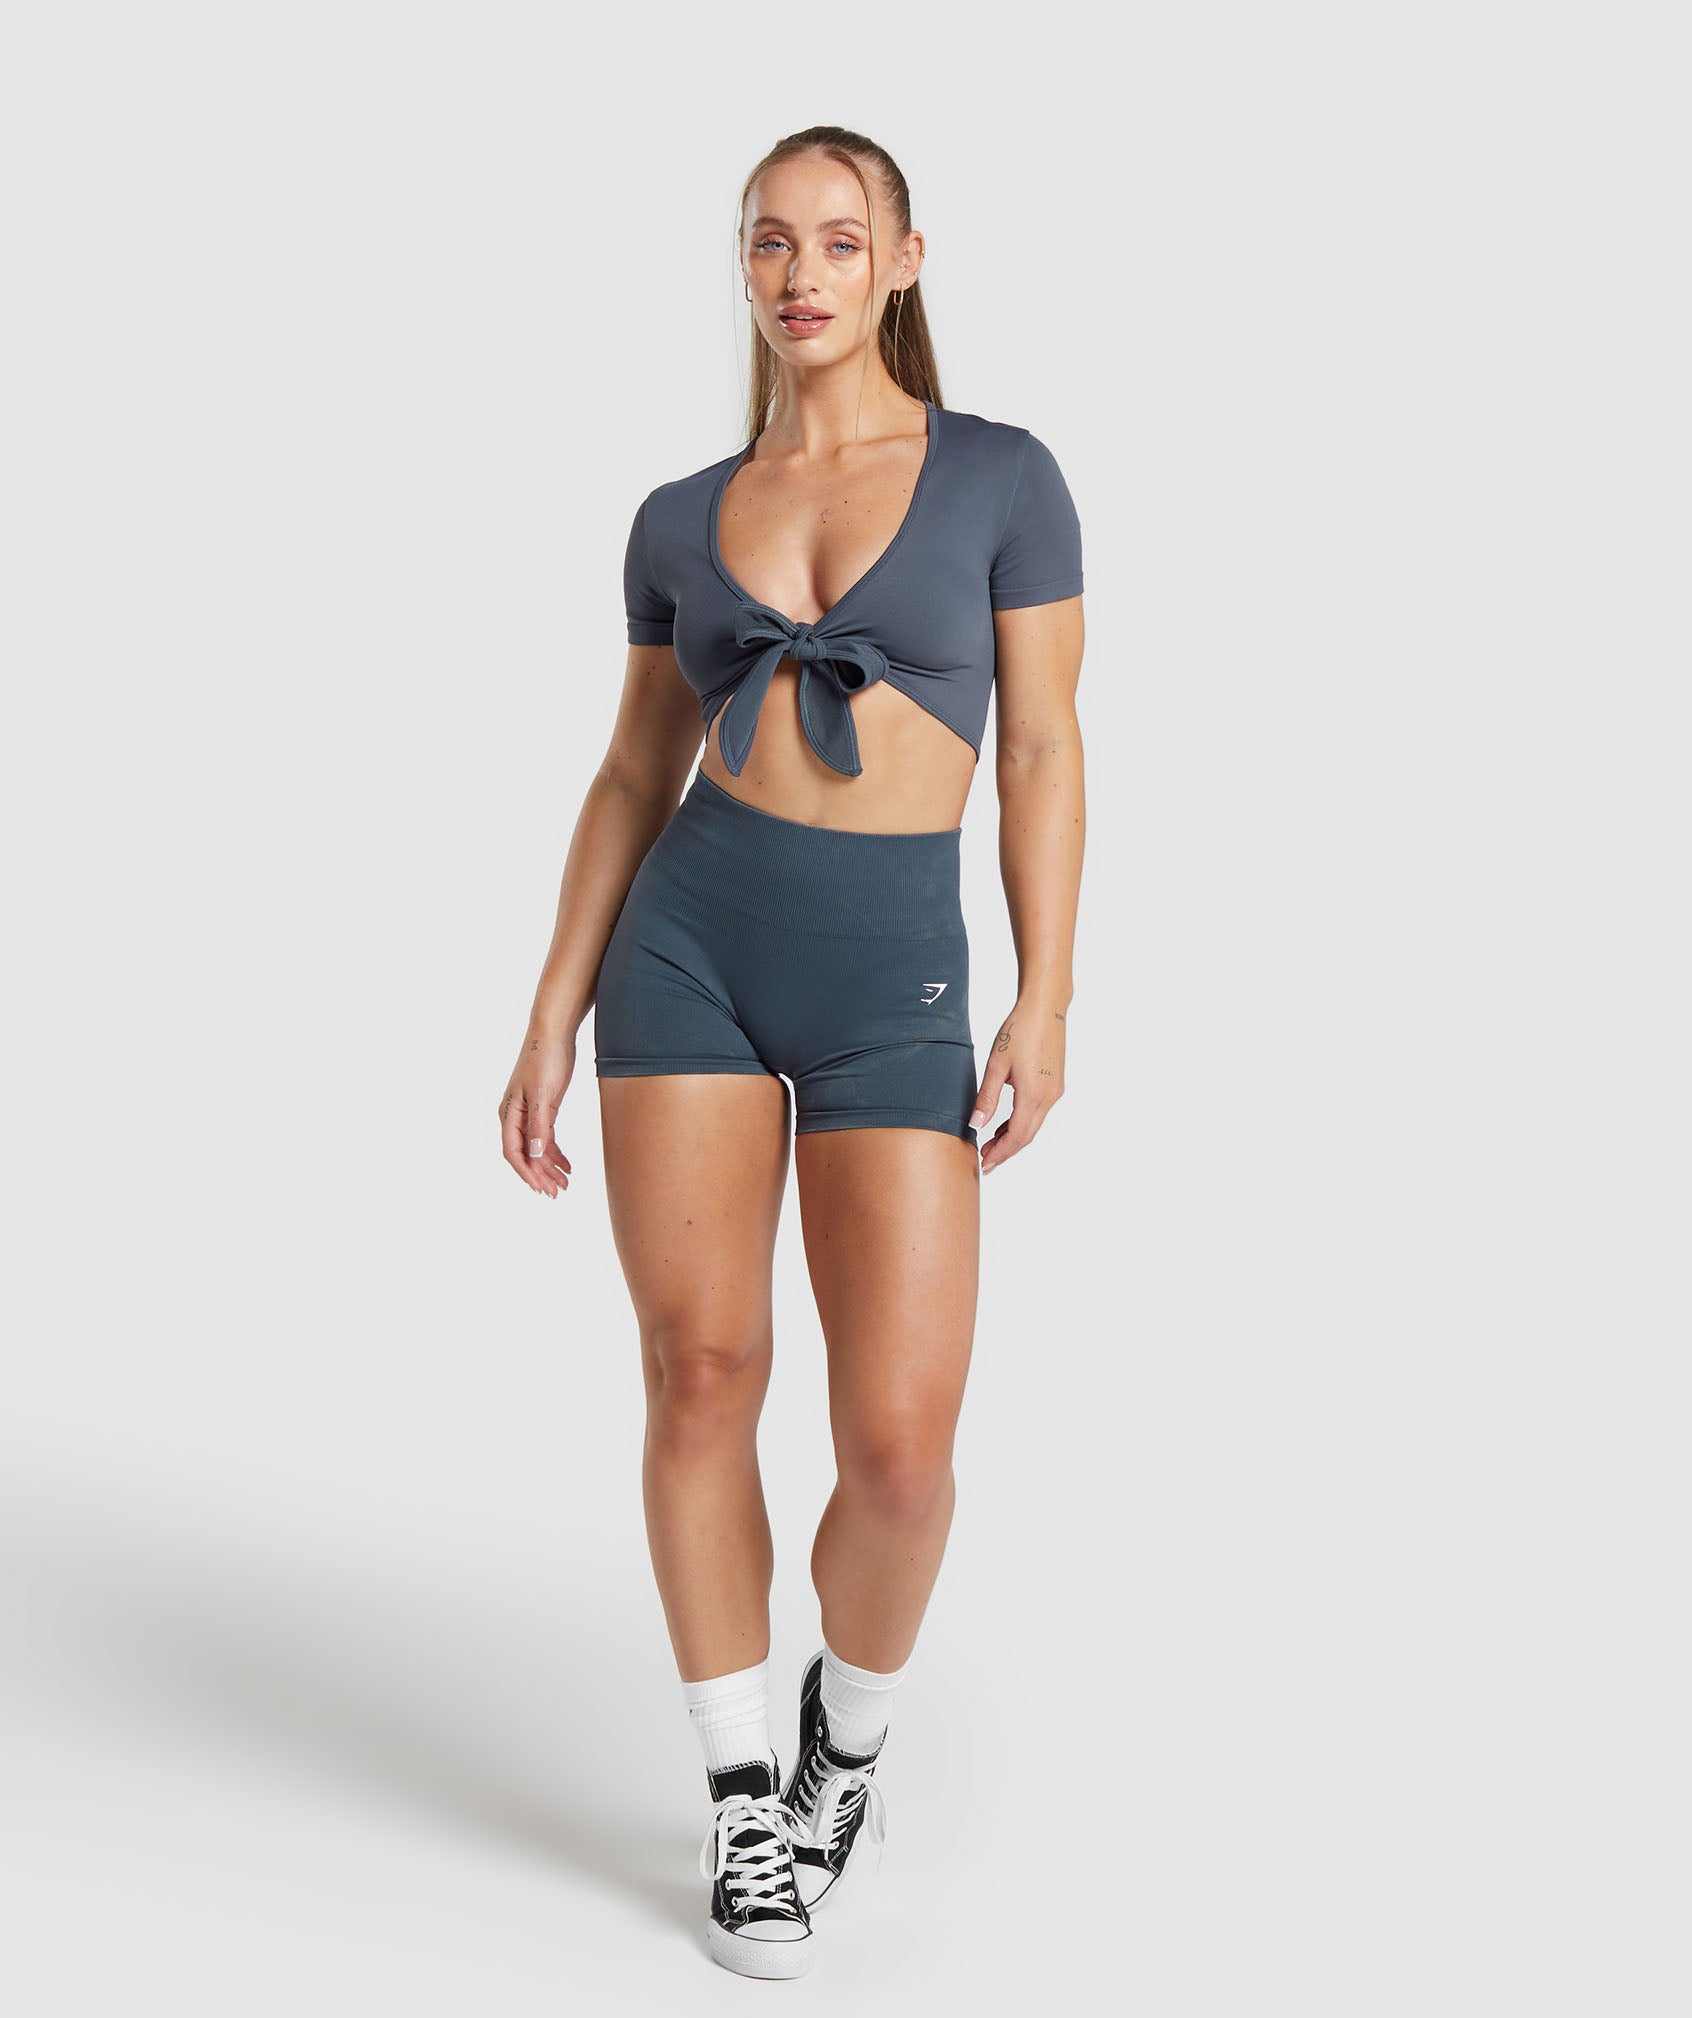 Gains Seamless Fitted Crop Top in Titanium Blue - view 5